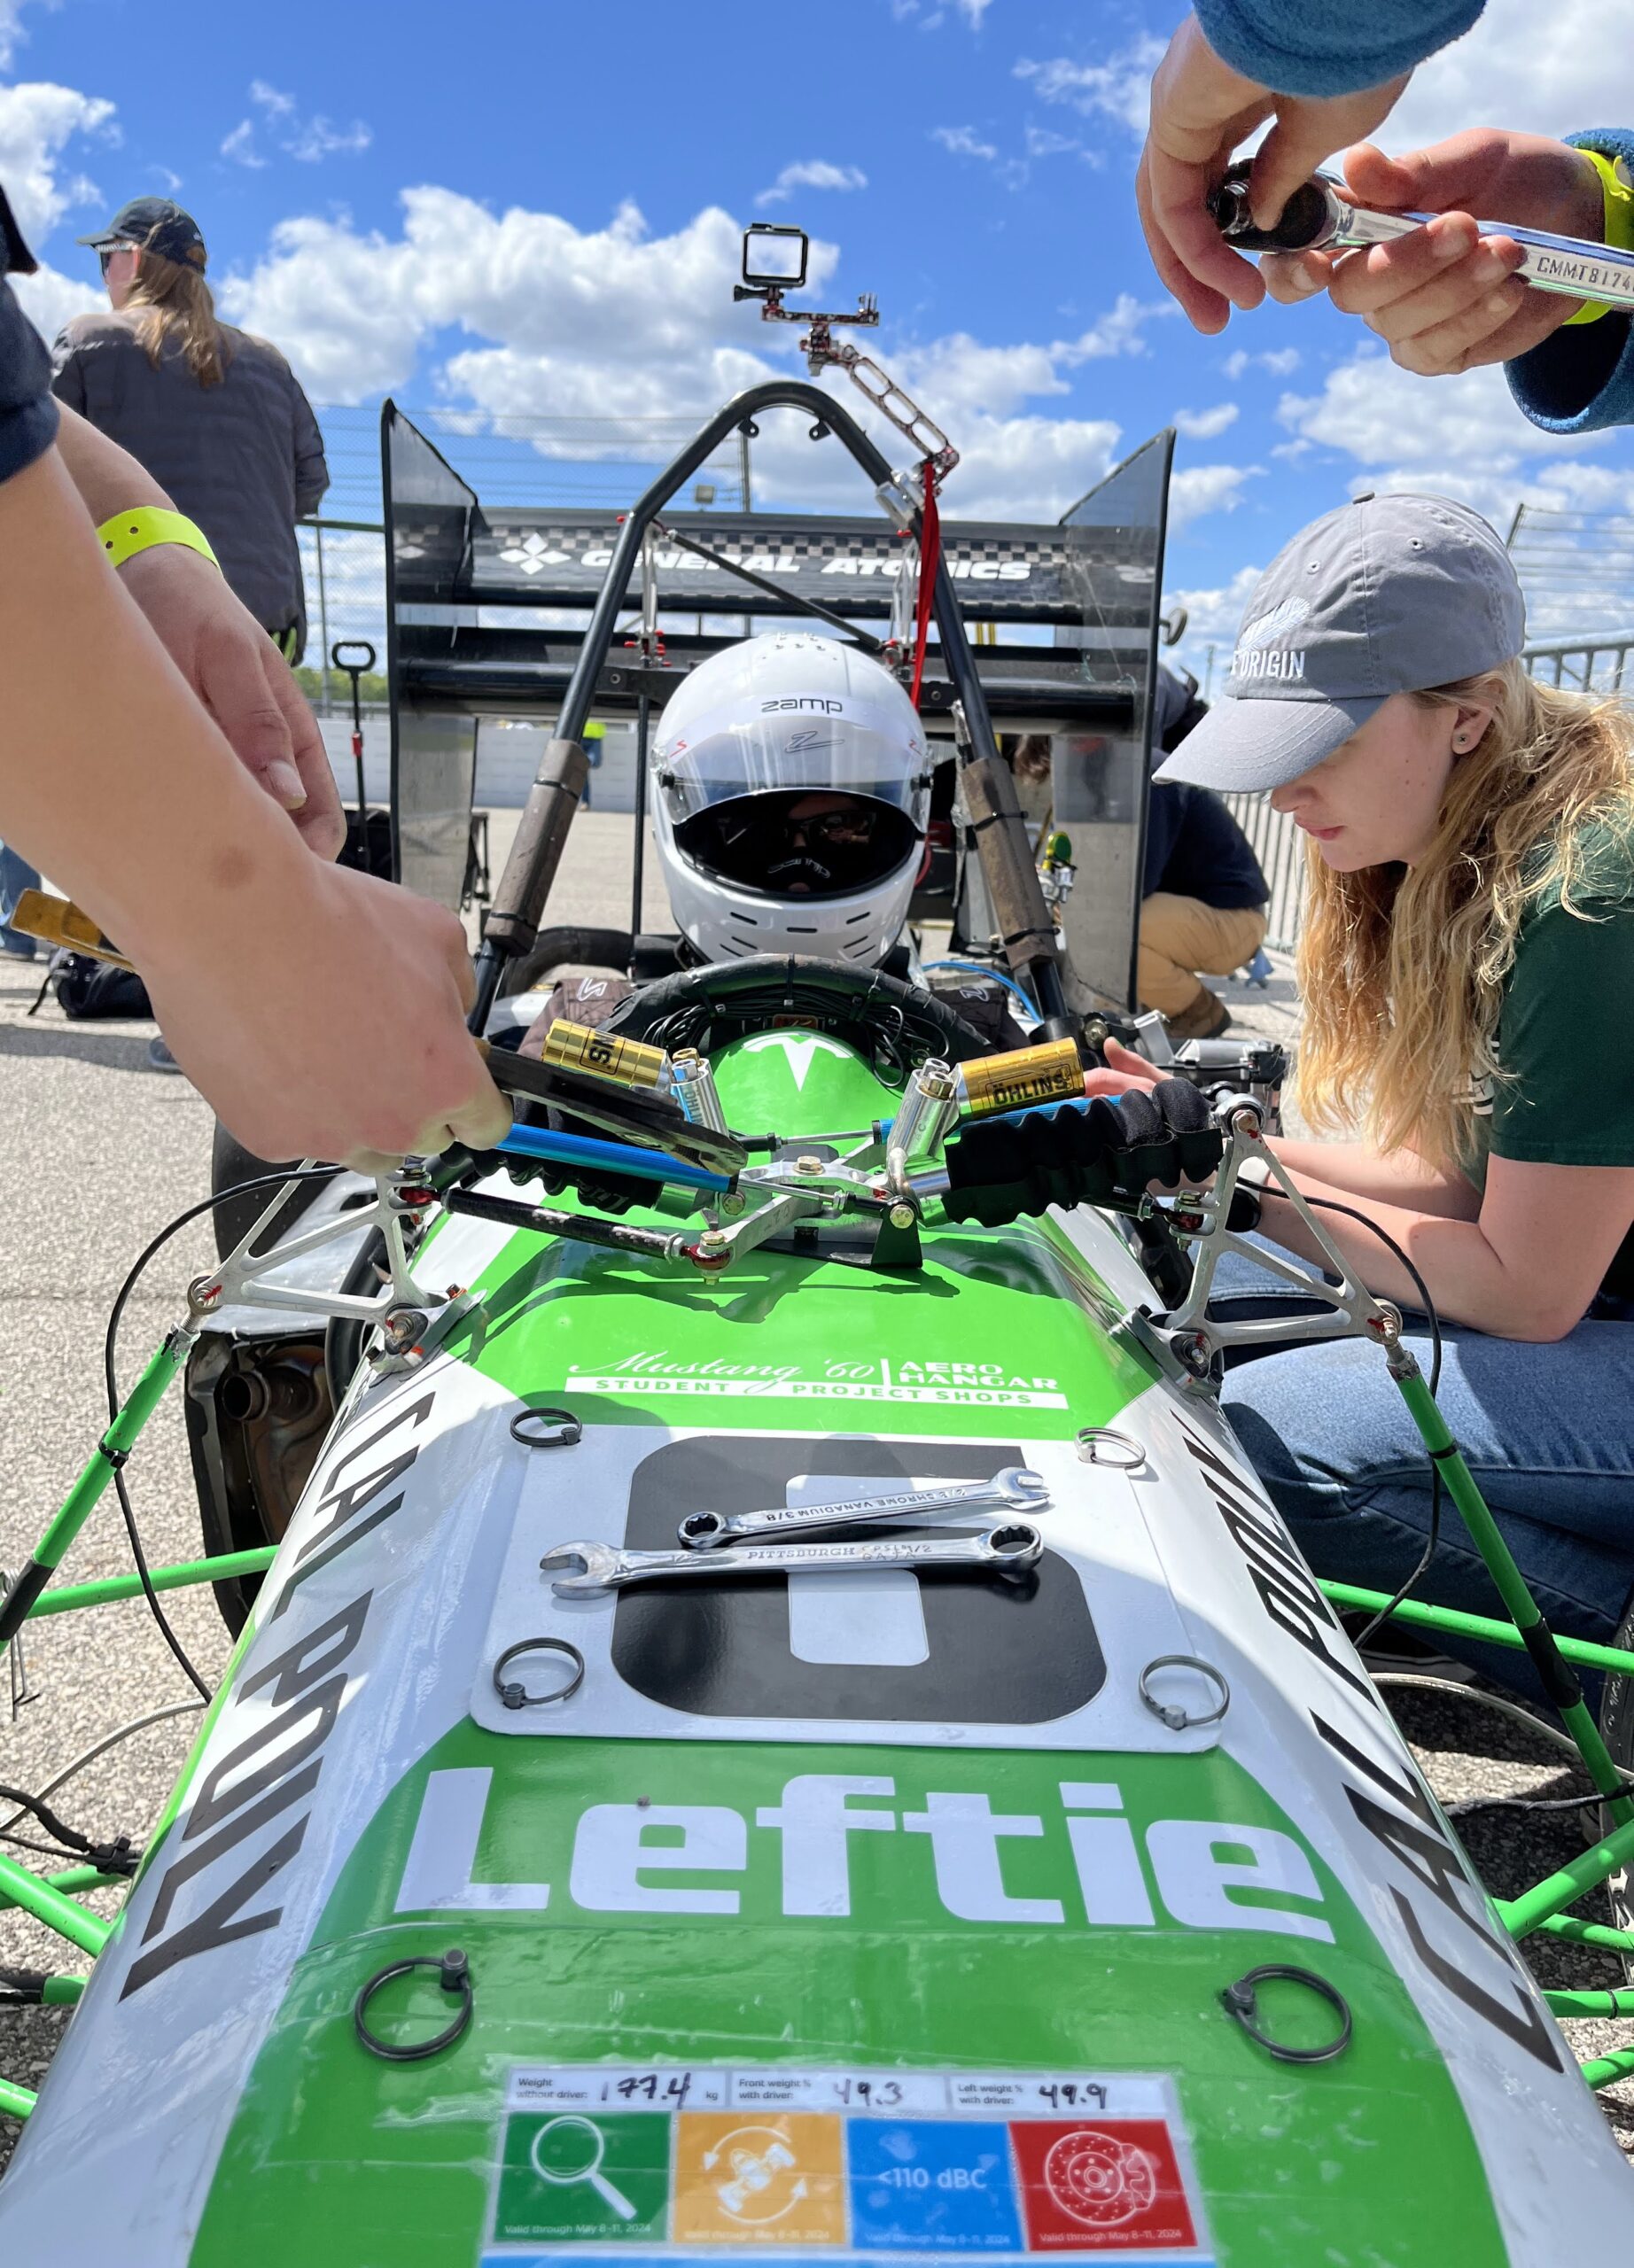 Cal Poly Racing' Formula crew prepares their car for competition